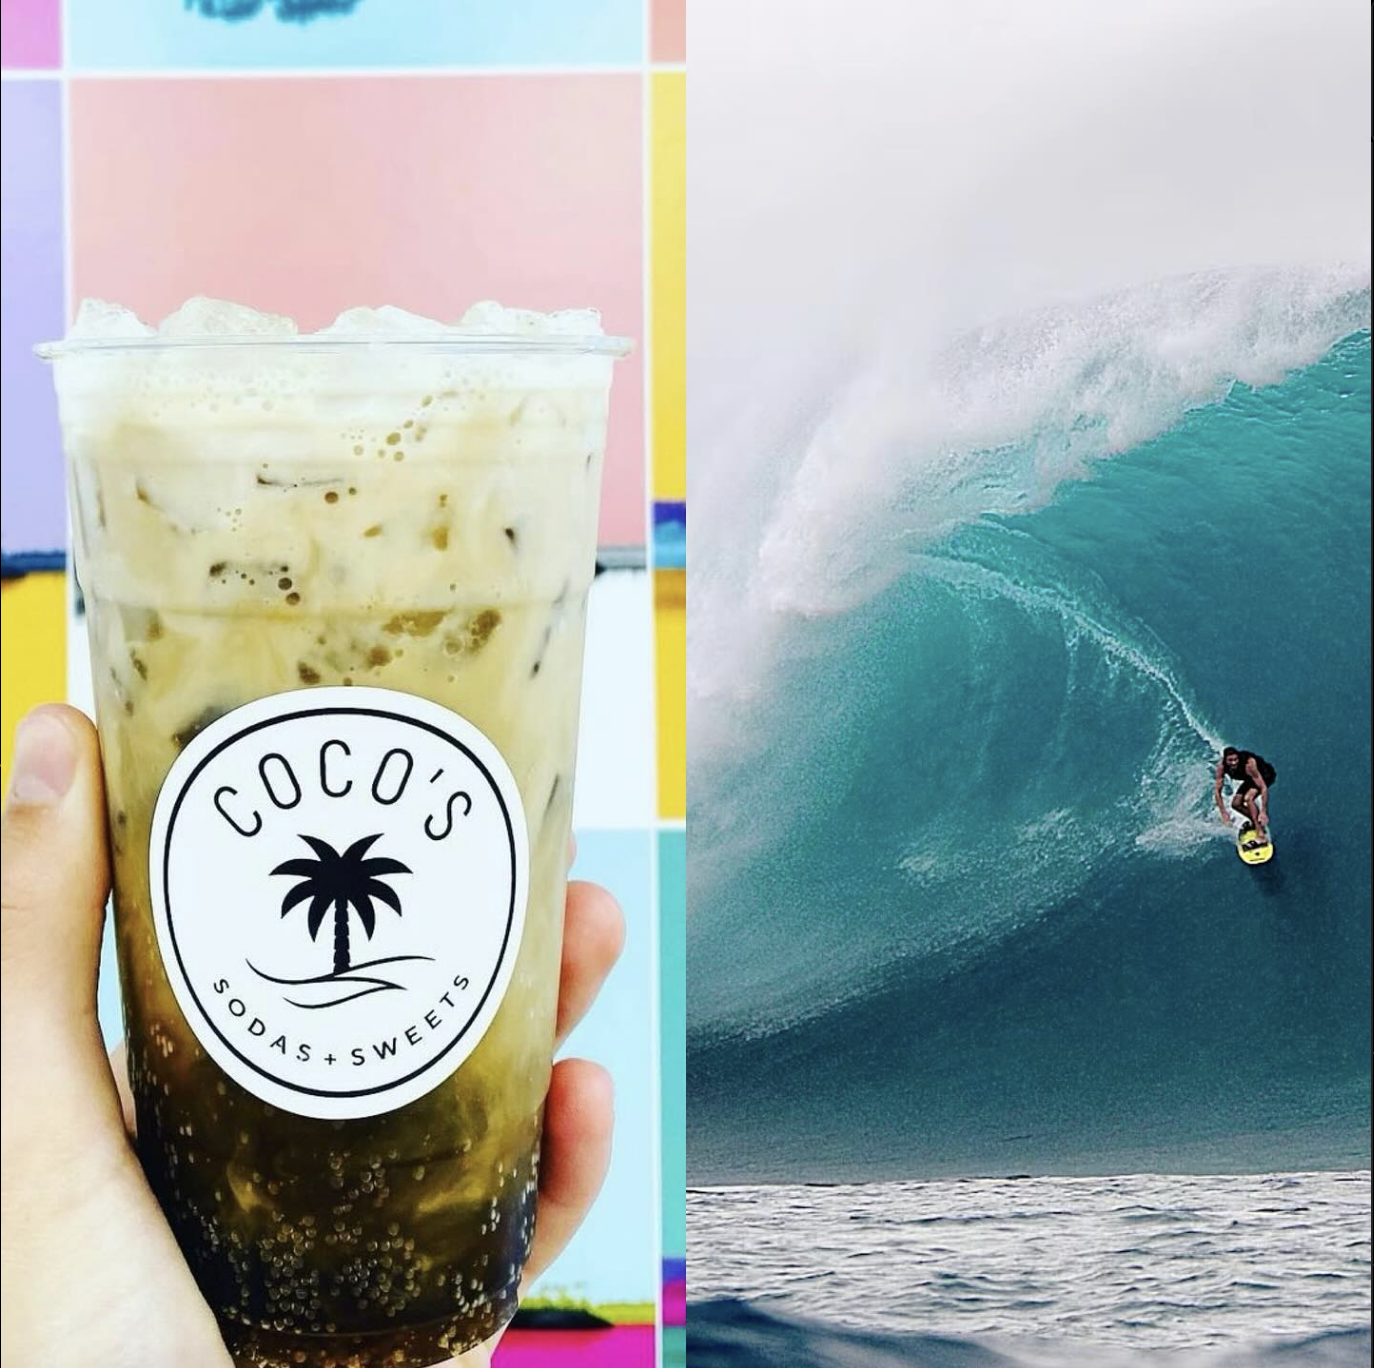 Image of a delicious Coco's drink next to a man surfing.